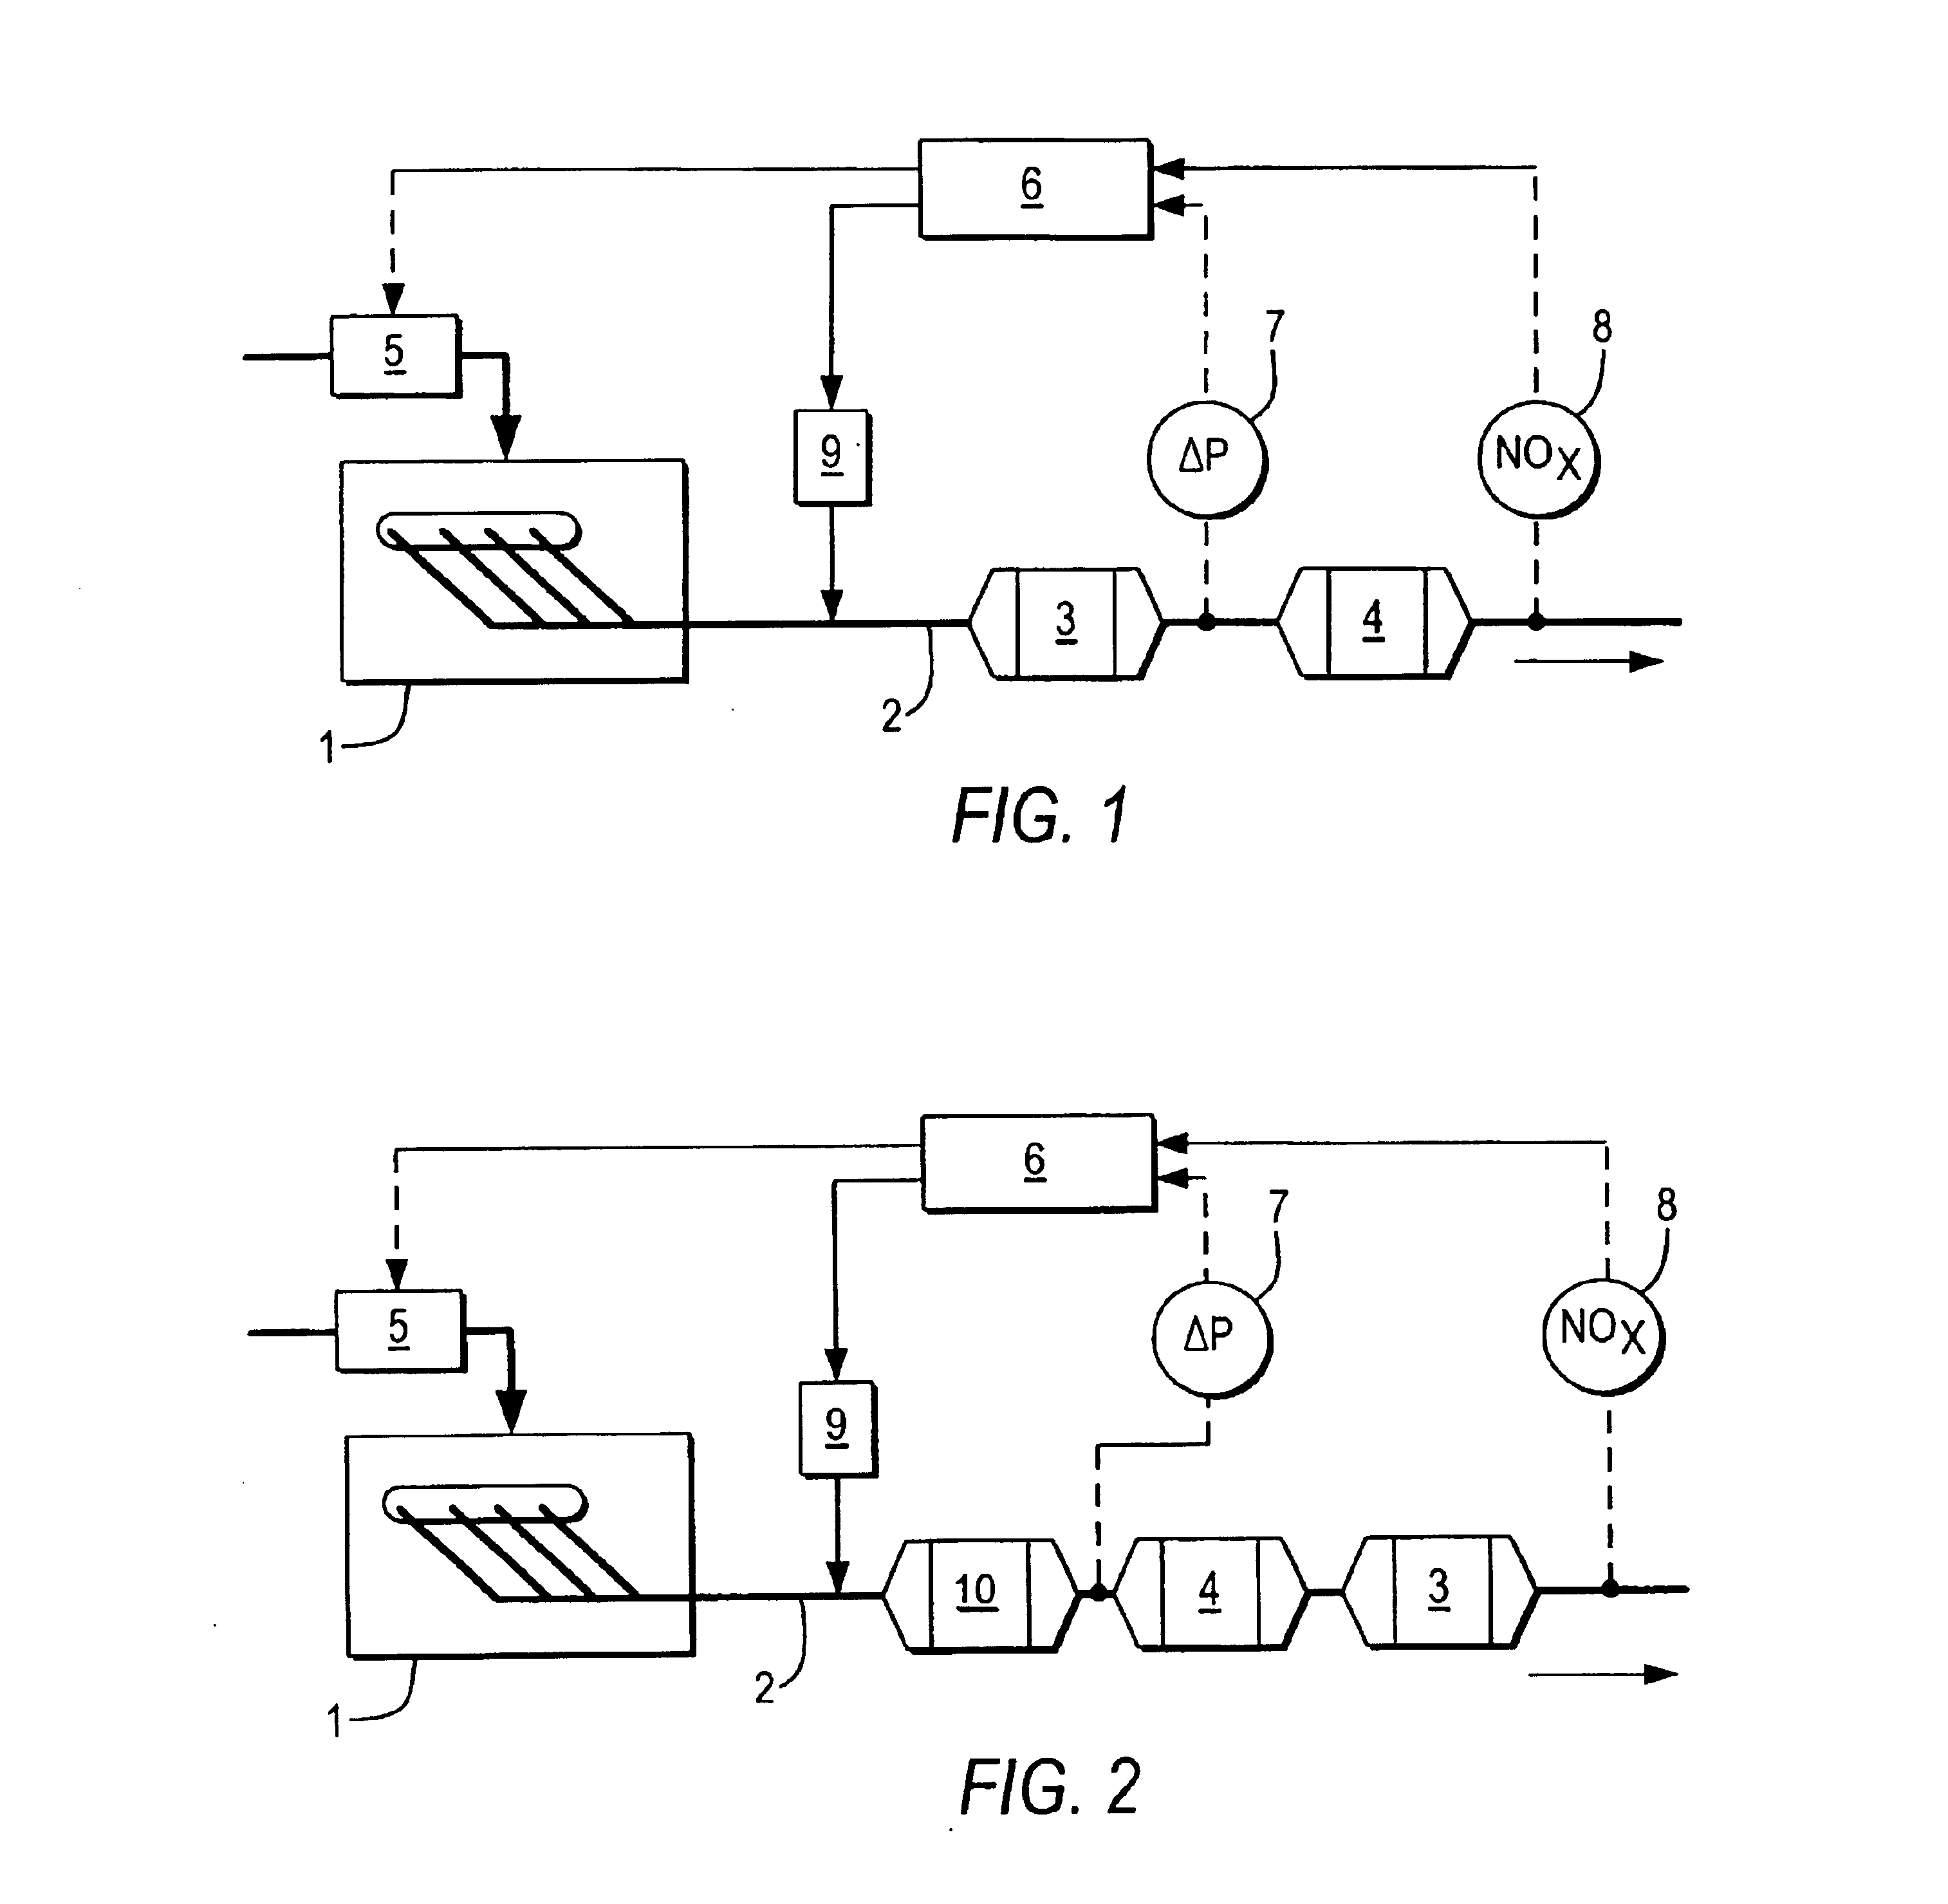 Method for removing nitrogen oxides and particulates from the lean exhaust gas of an internal combustion engine and exhaust gas emission system